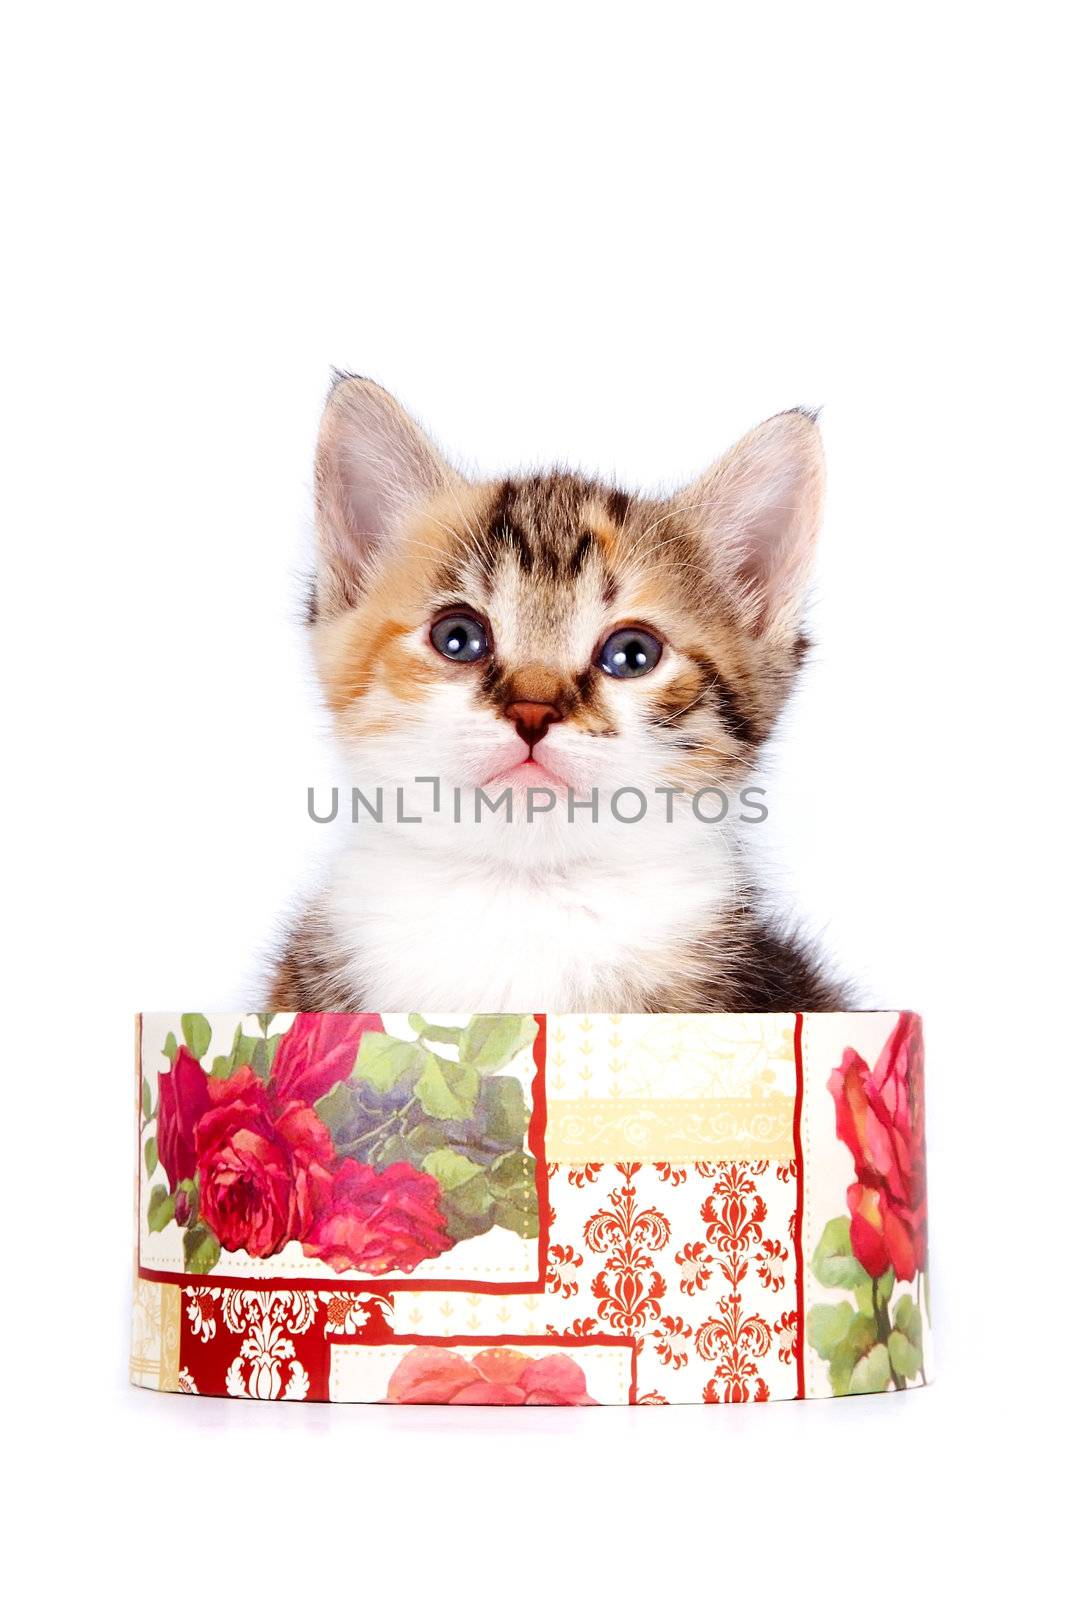 Multi-colored kitten in a gift box on a white background